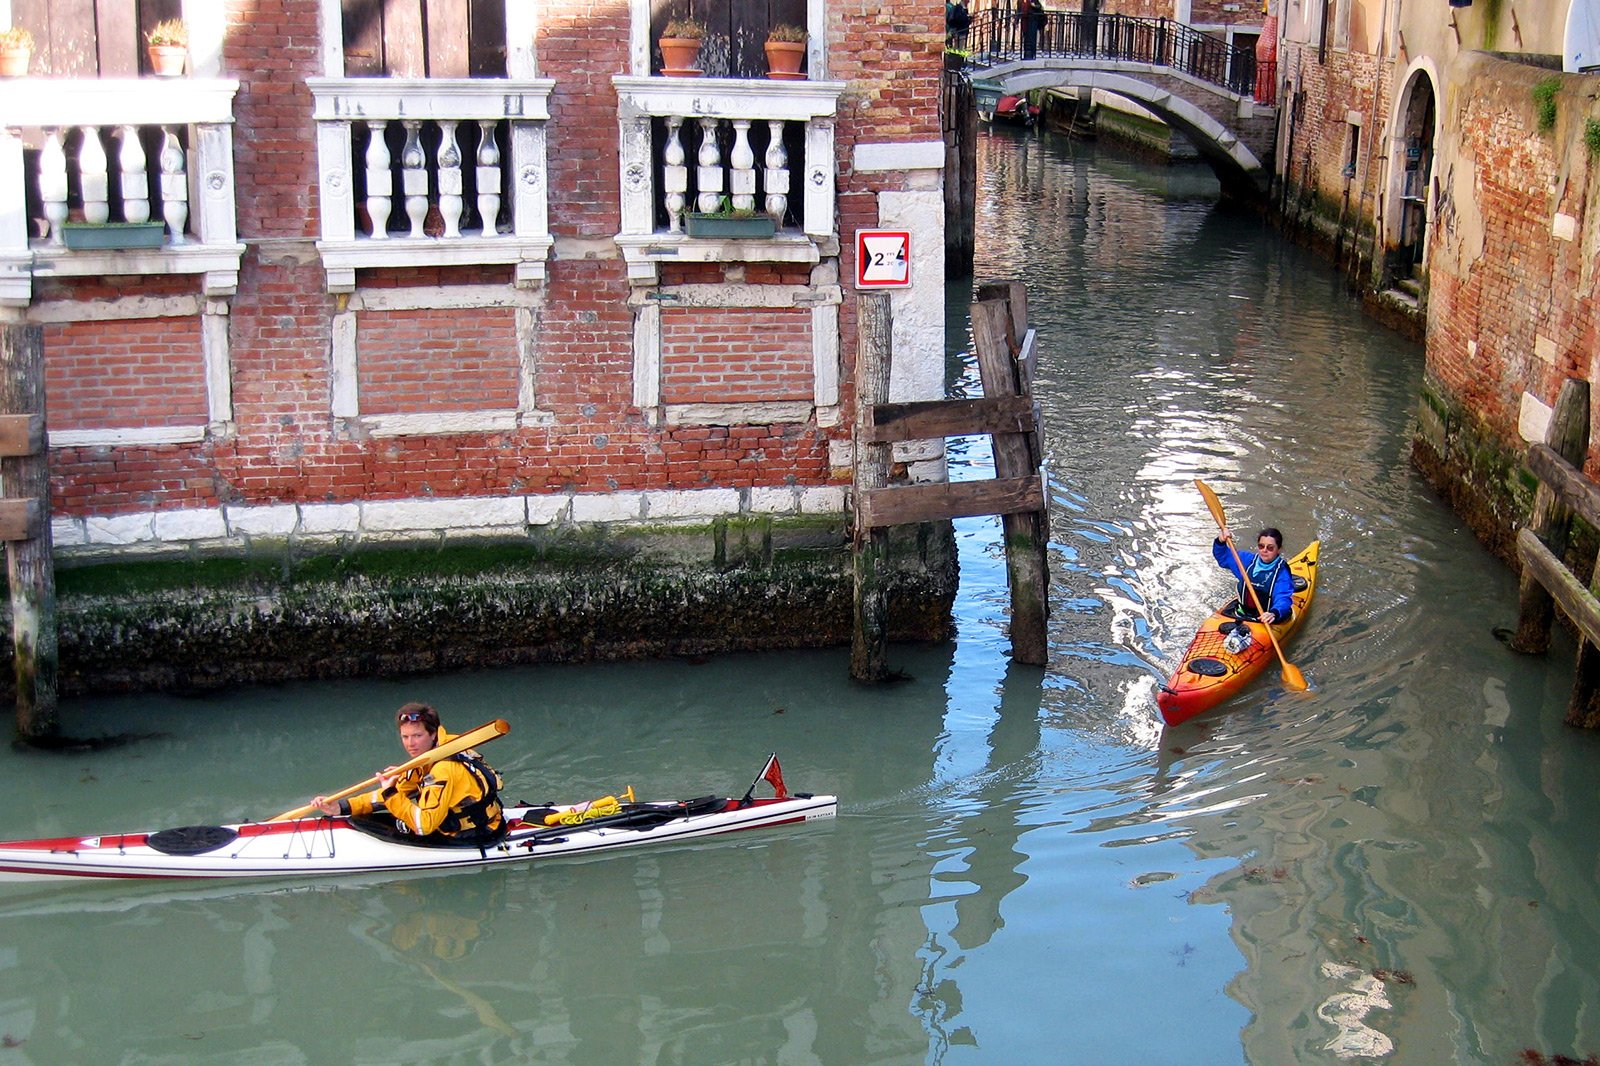 How to enjoy kayaking in Venice